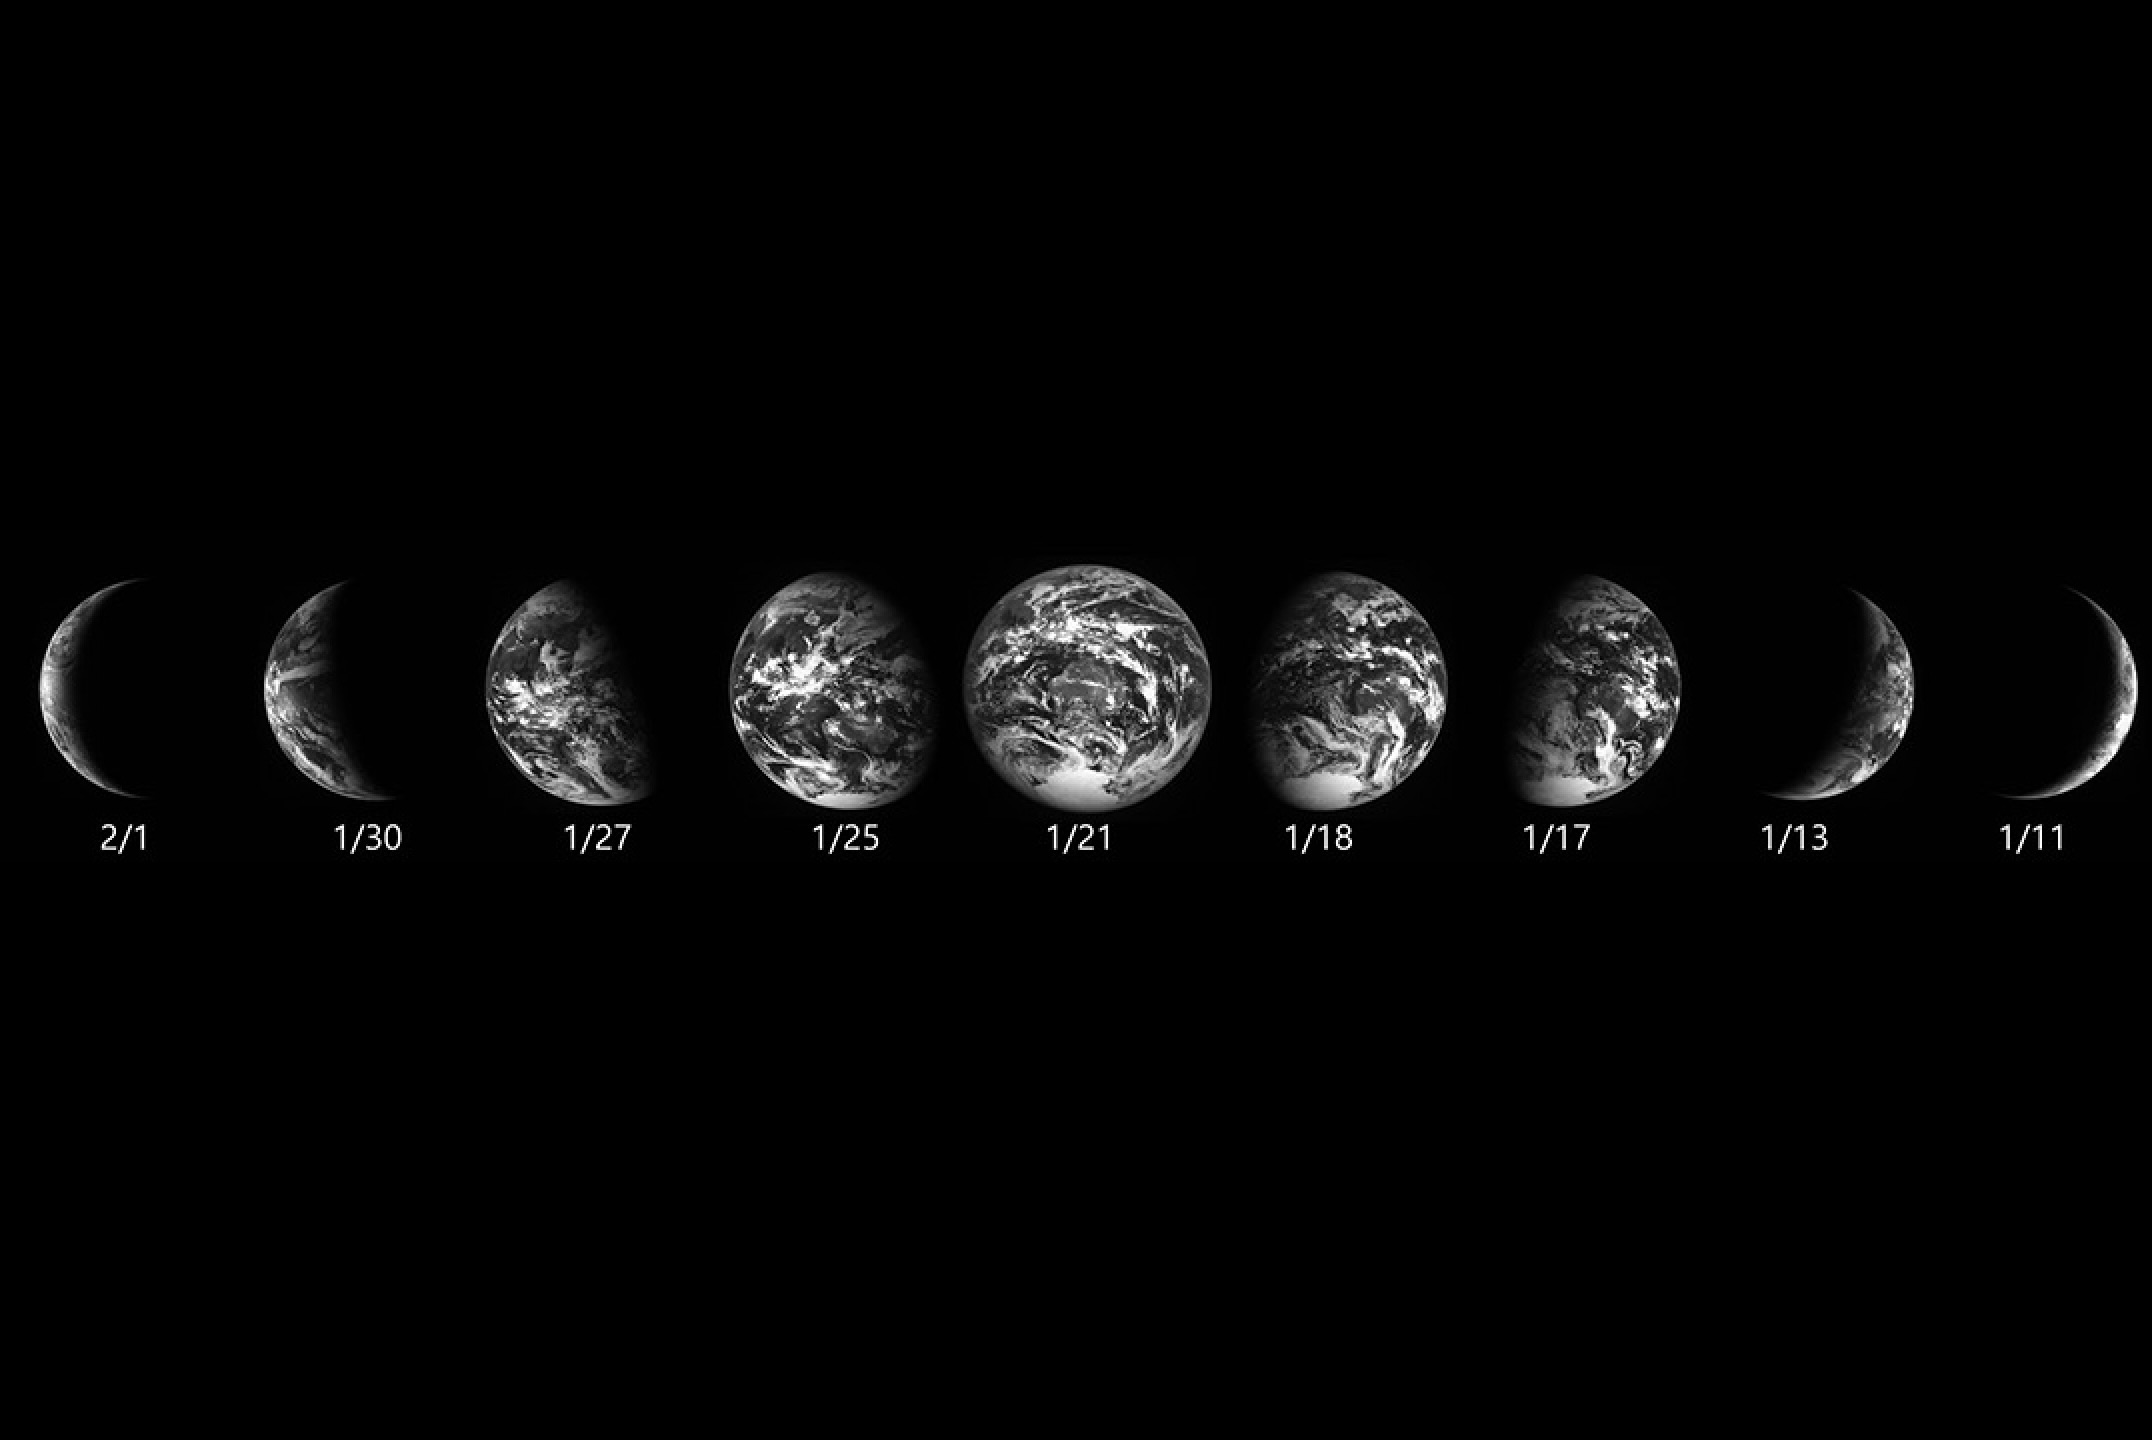 South Korea's Danuri probe captures phases of Earth from lunar orbit (photo)